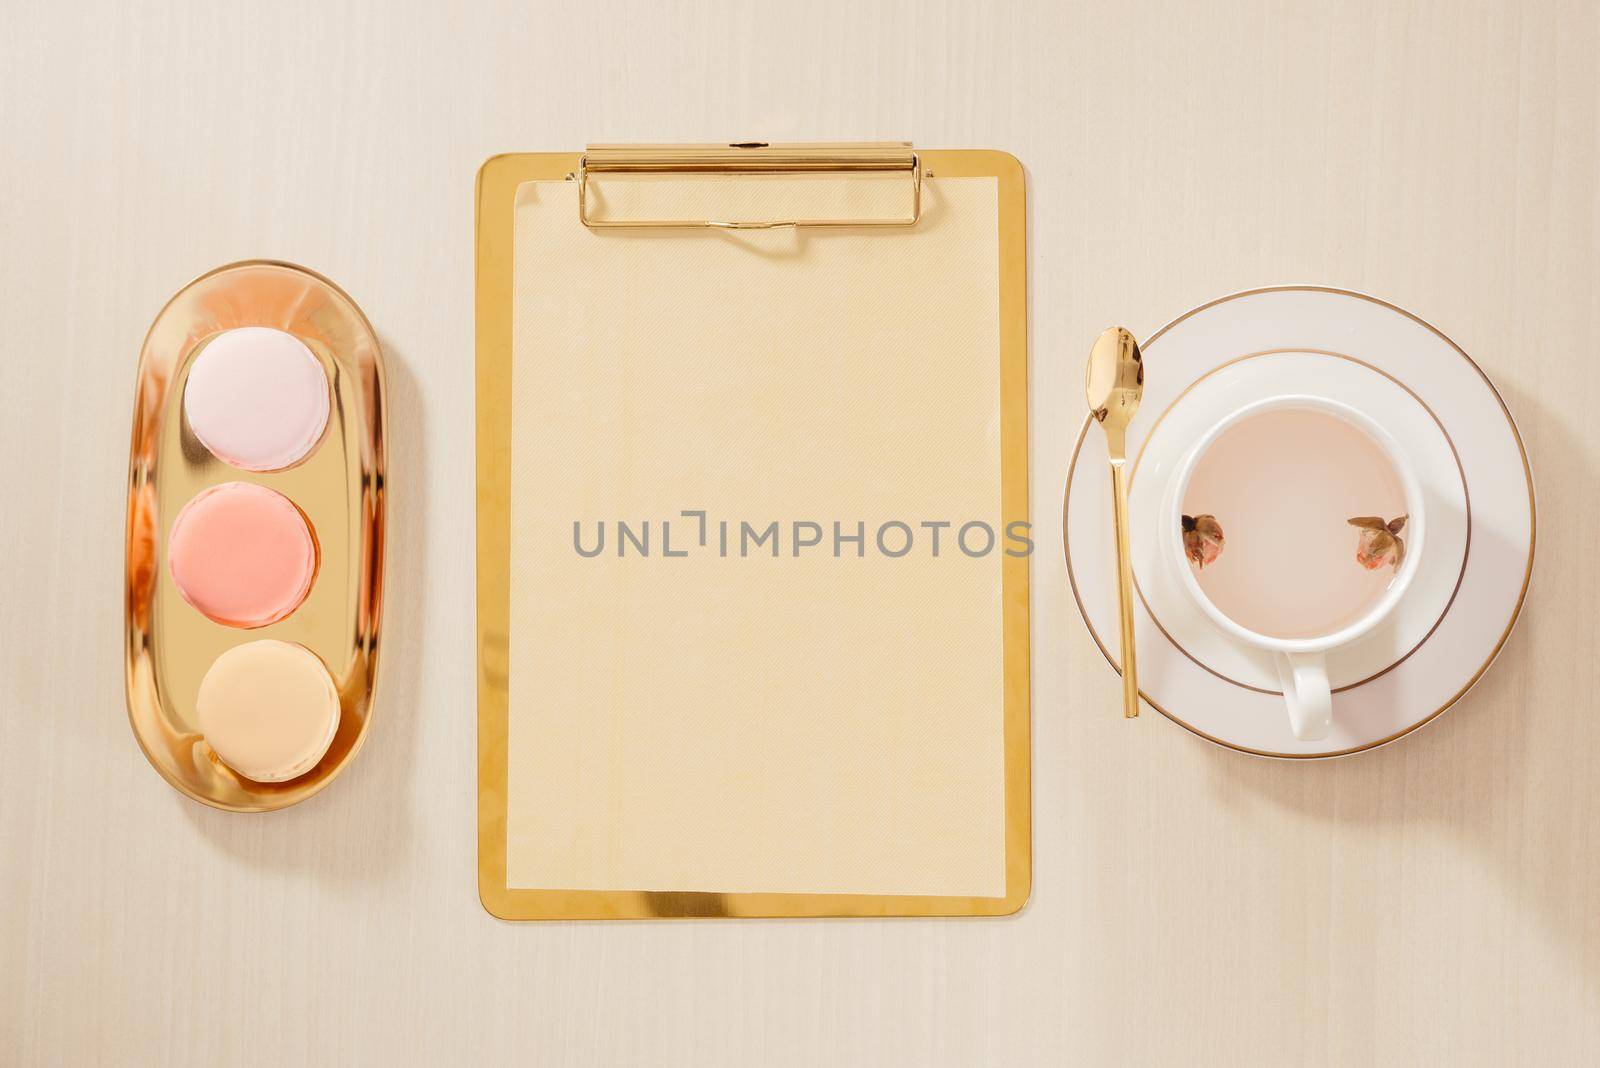 Women's home office workspace with clipboard, macaroons, pen, coffee mug on pastel background. Flat lay, top view lifestyle concept.